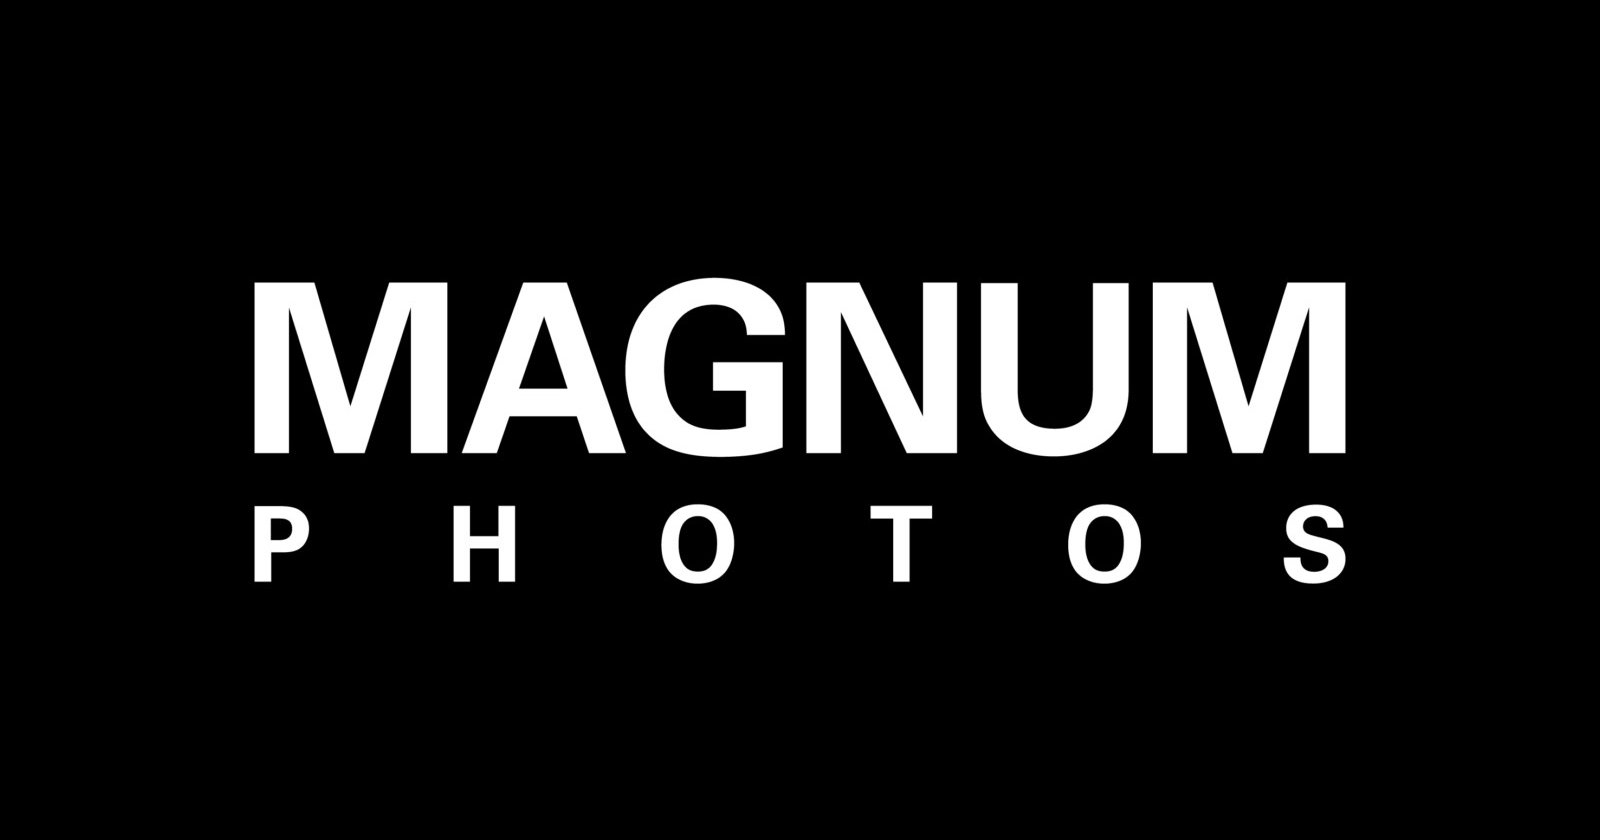 Magnum Photos Promises More Investigations in Response to Harrowing Exposé